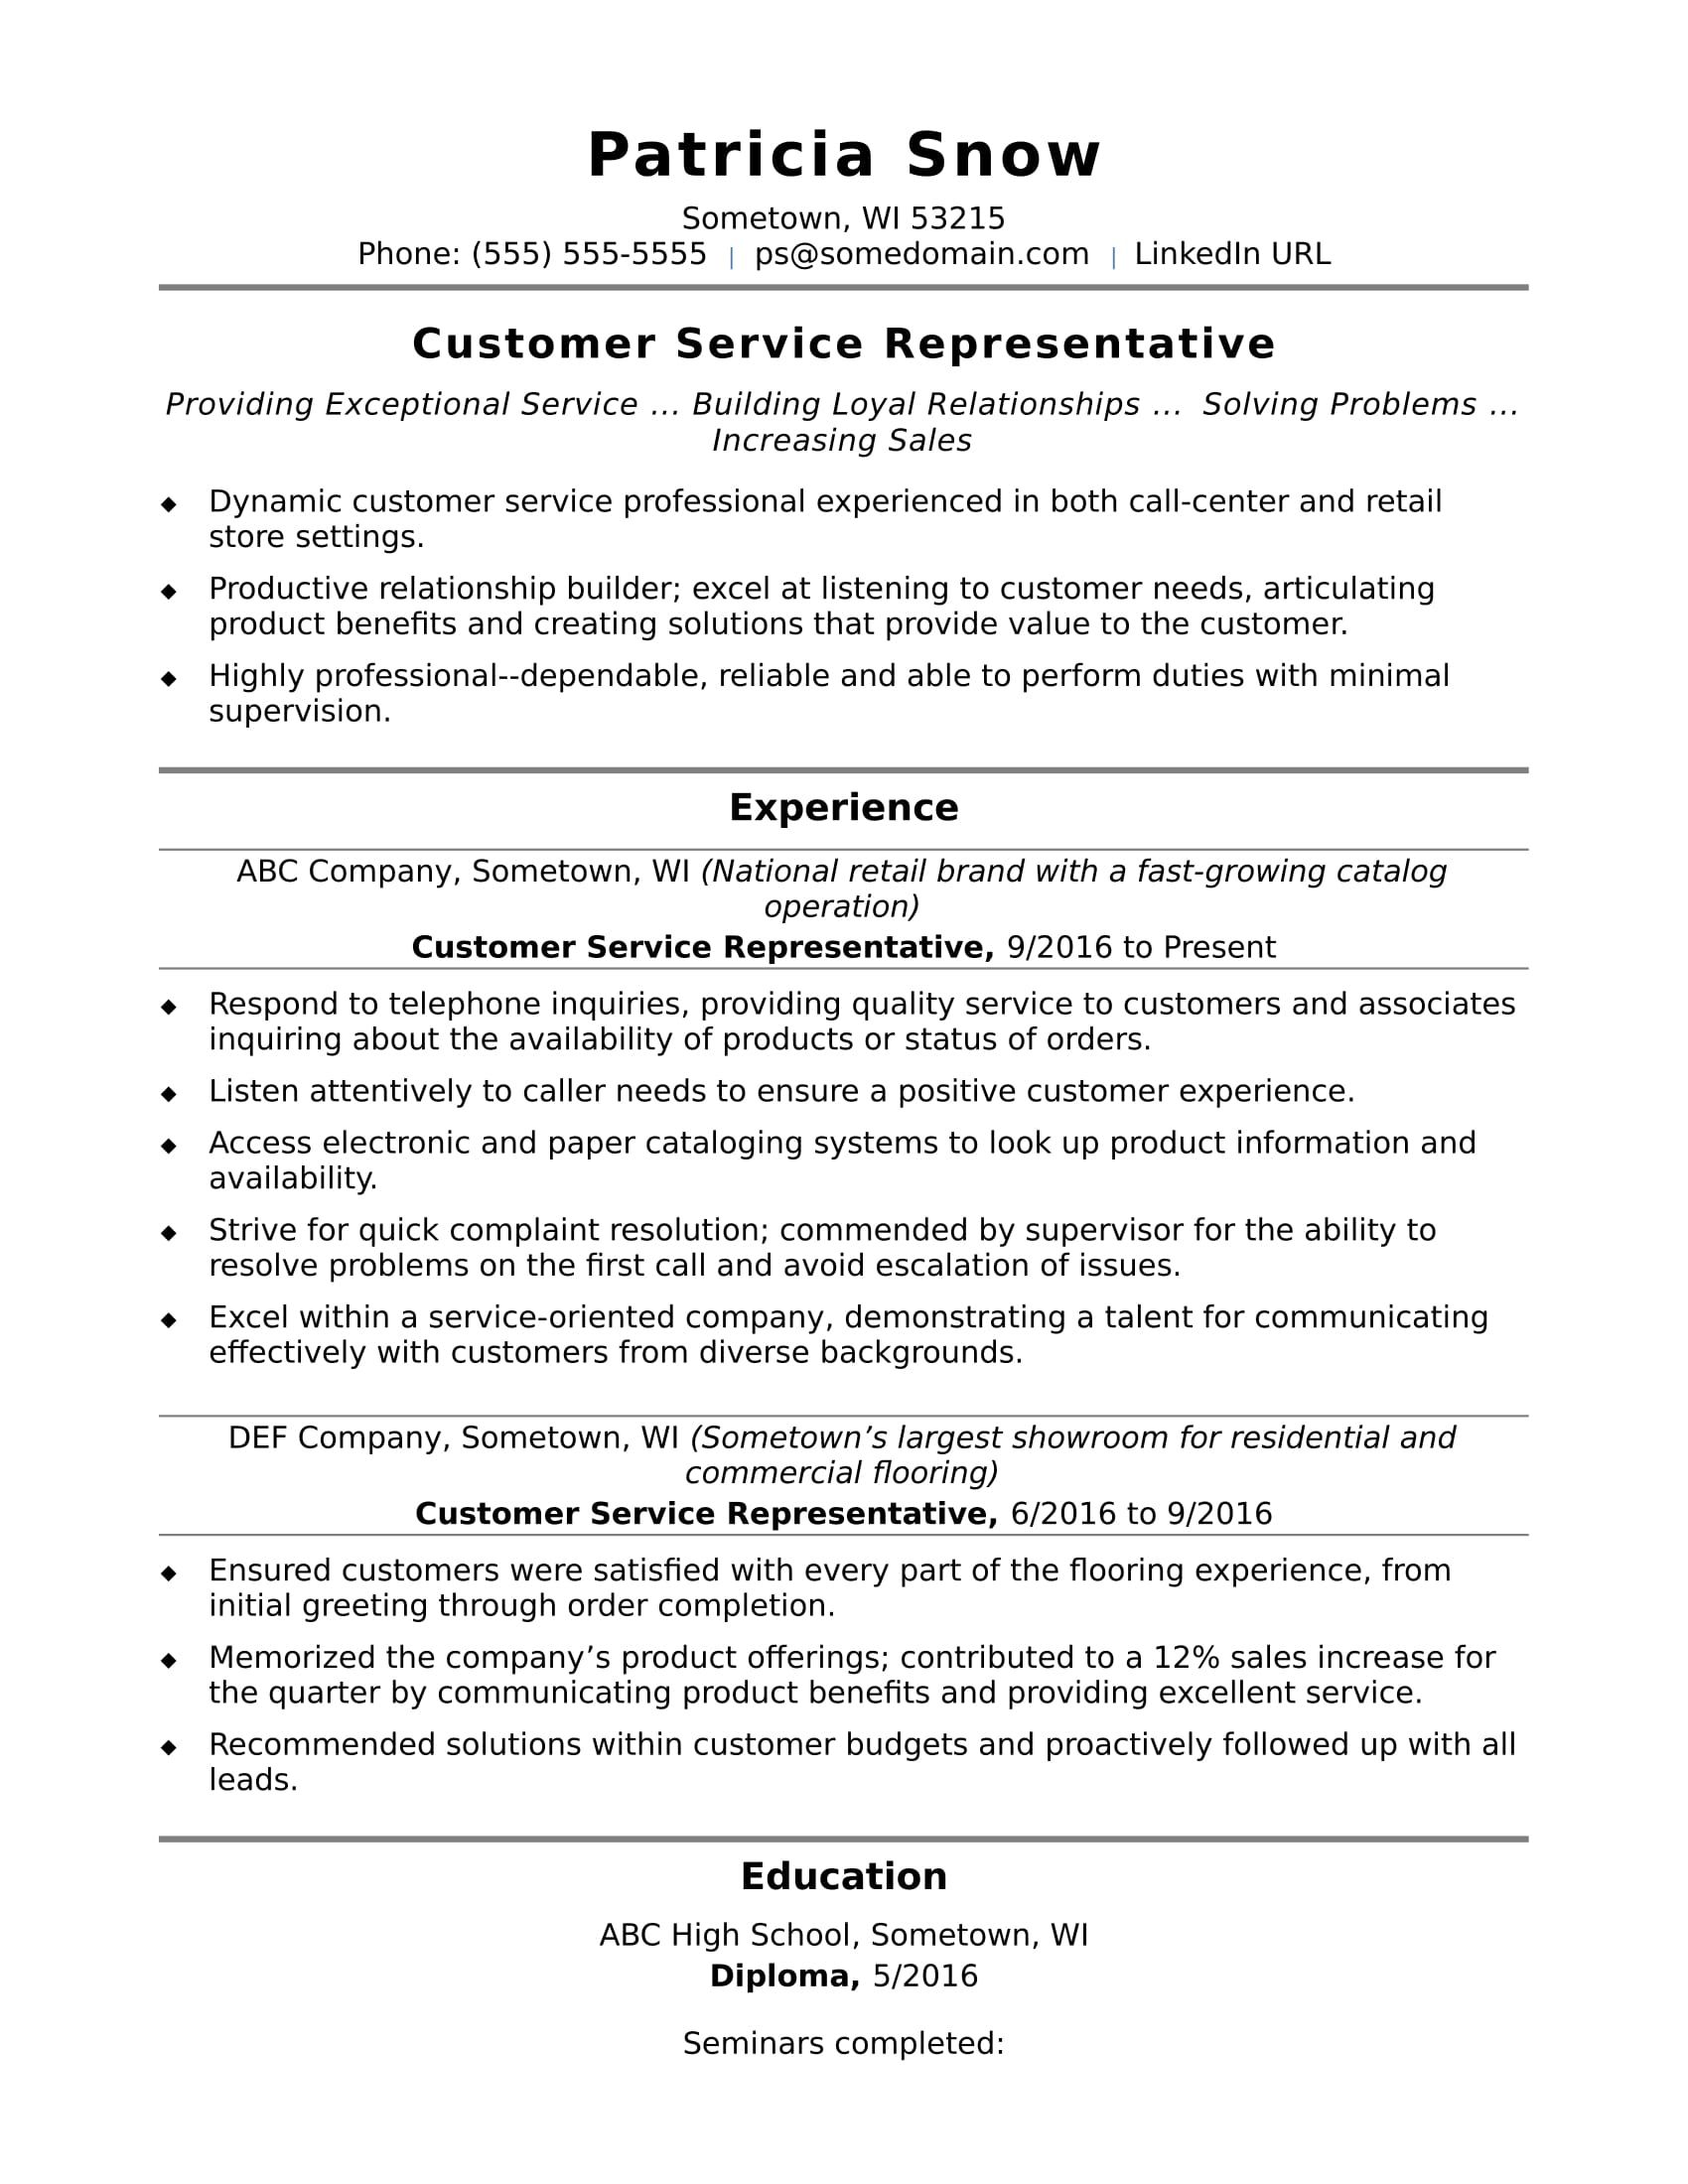 View our sample resume for an entry